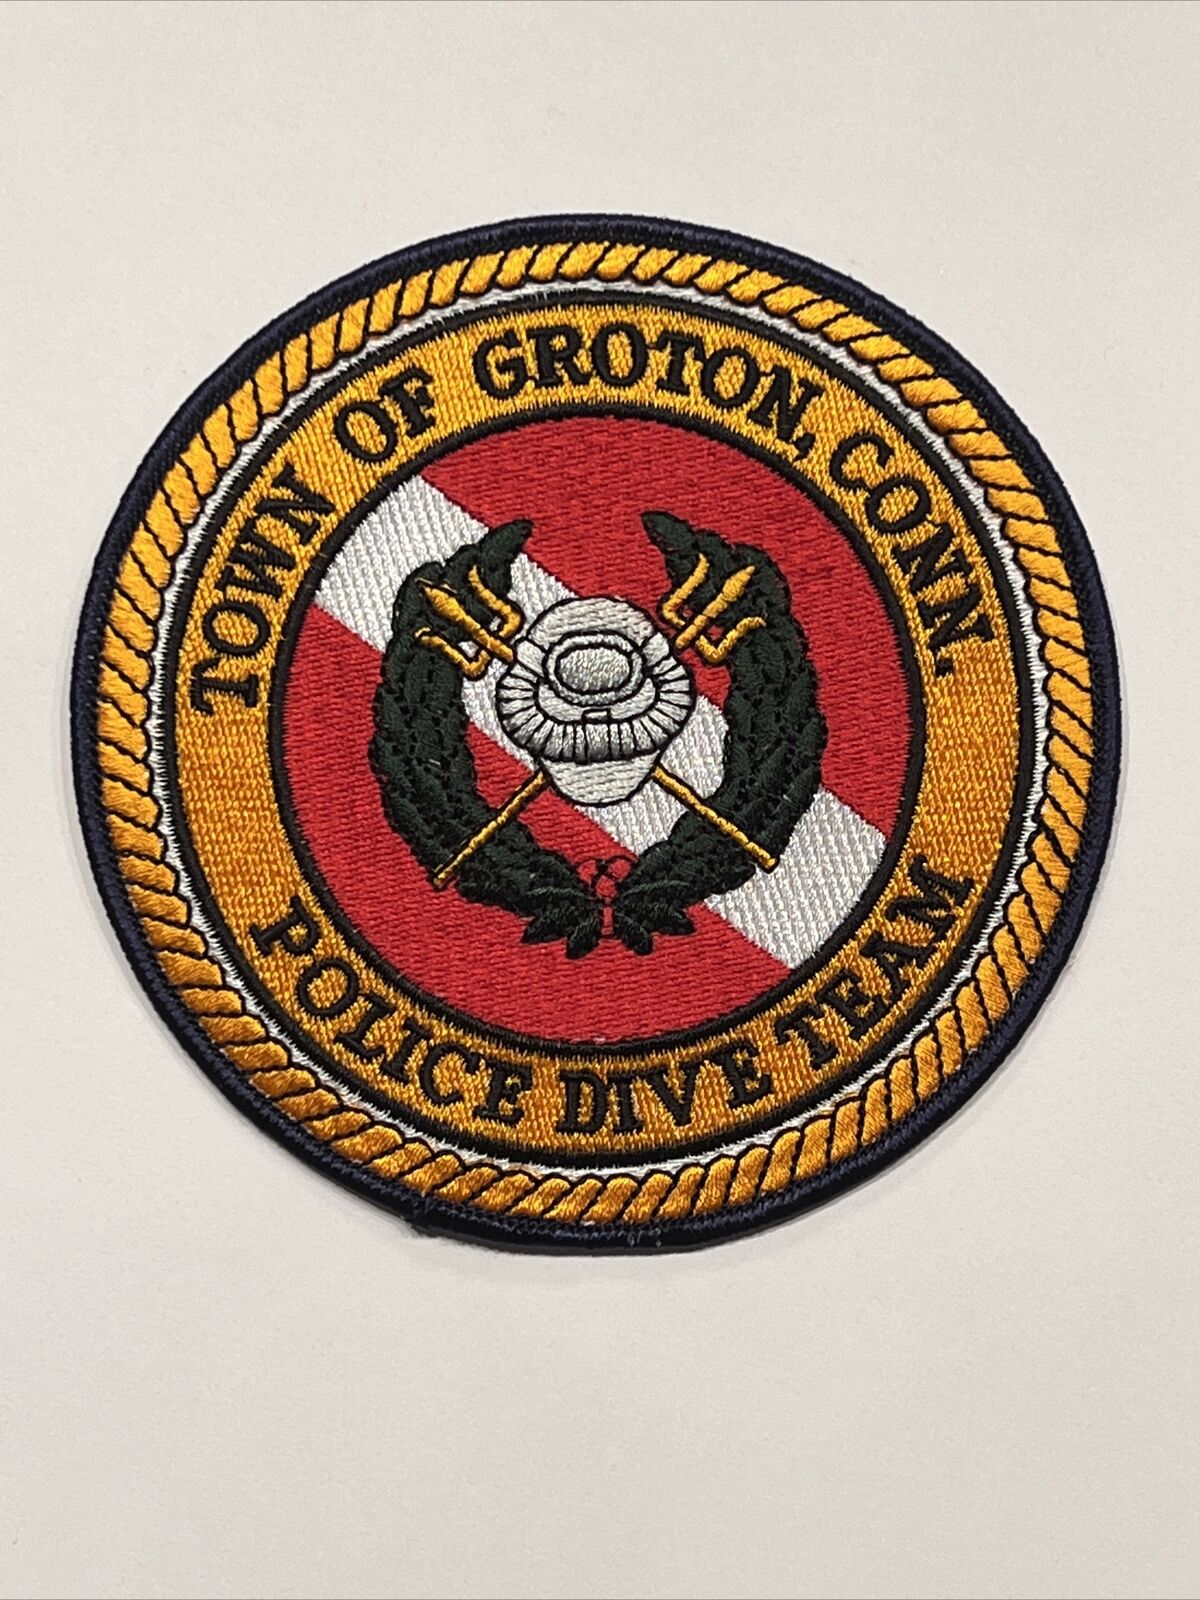 Defunct Groton Connecticut Police Dept Dive Team Patch - Disbanded CT